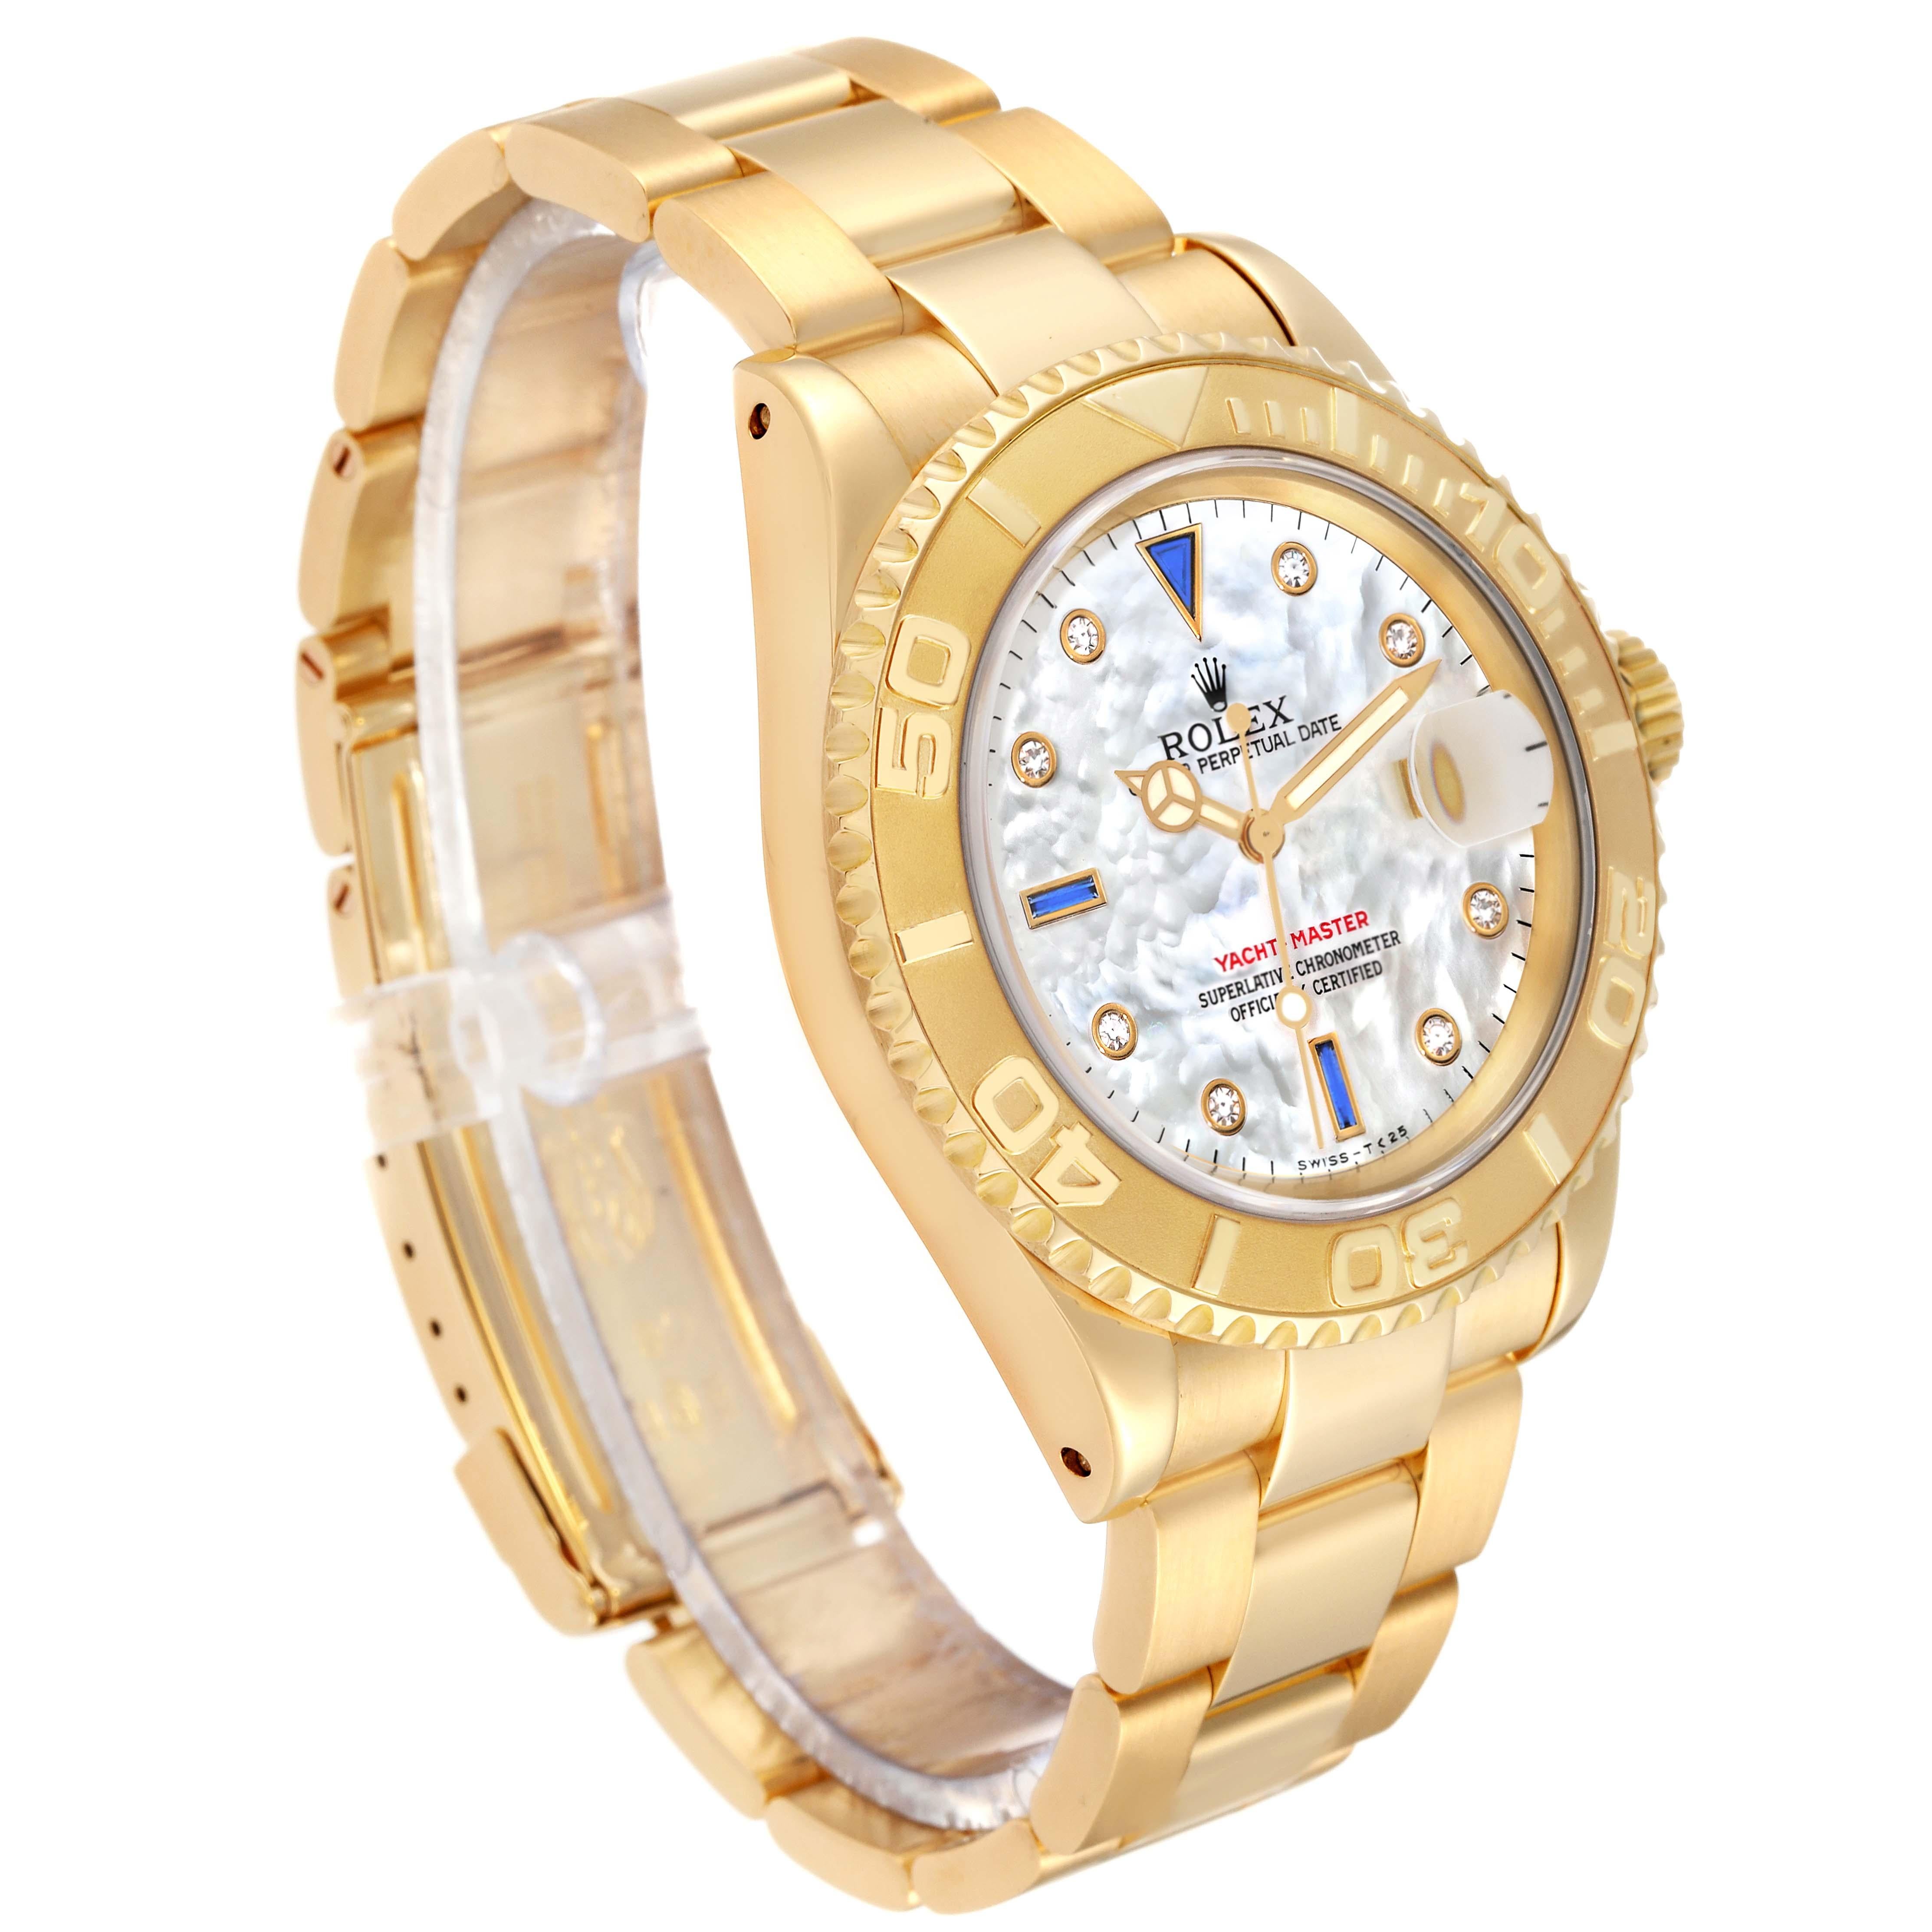 Rolex Yachtmaster Yellow Gold Mother of Pearl Diamond Sapphire Serti Mens Watch 16628. Officially certified chronometer automatic self-winding movement. Rhodium-plated, oeil-de-perdrix decoration, straight-line lever escapement, freesprung